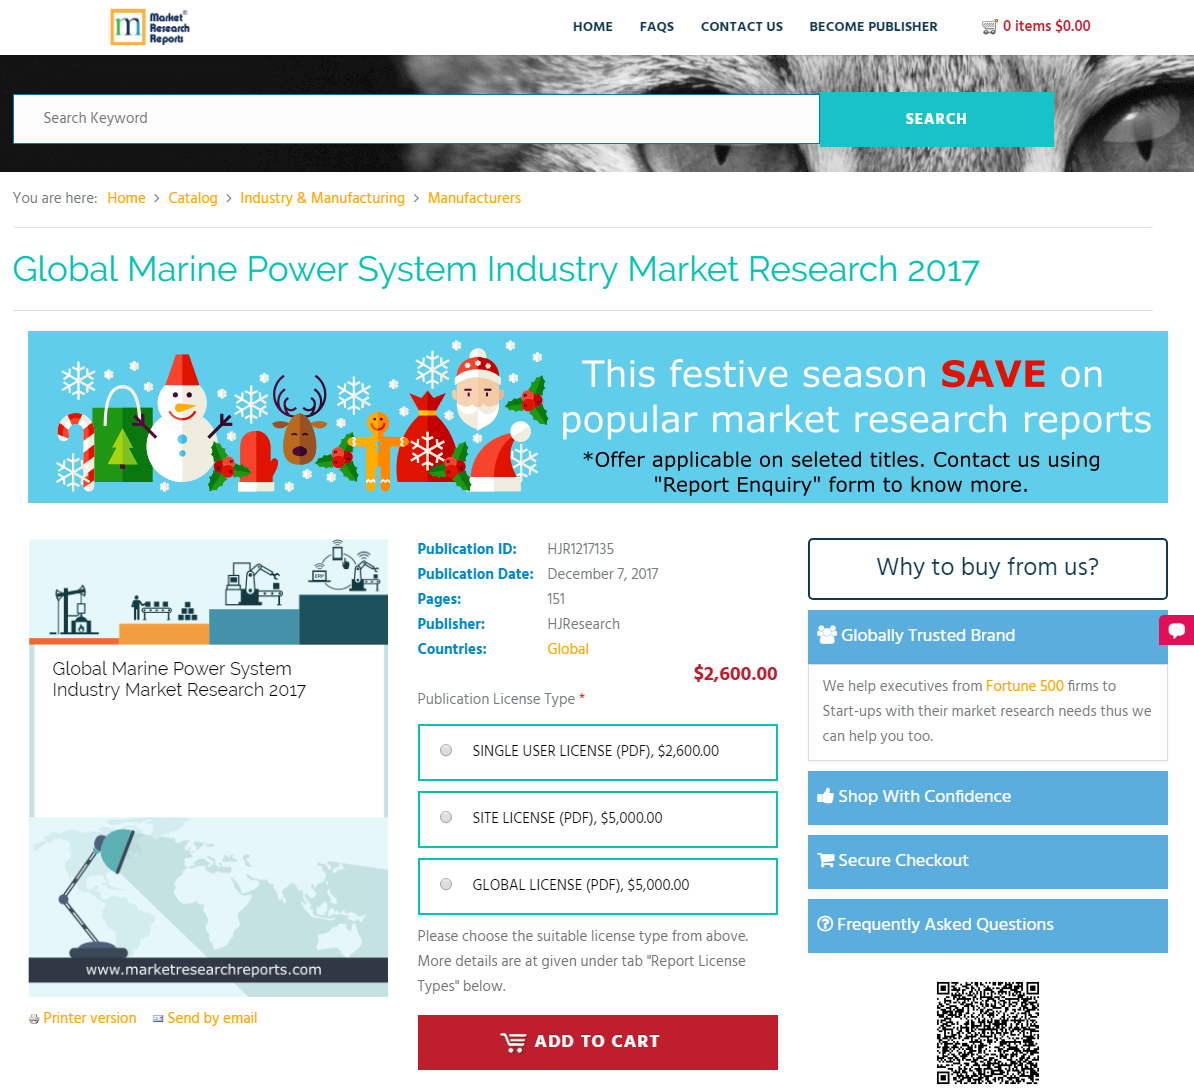 Global Marine Power System Industry Market Research 2017